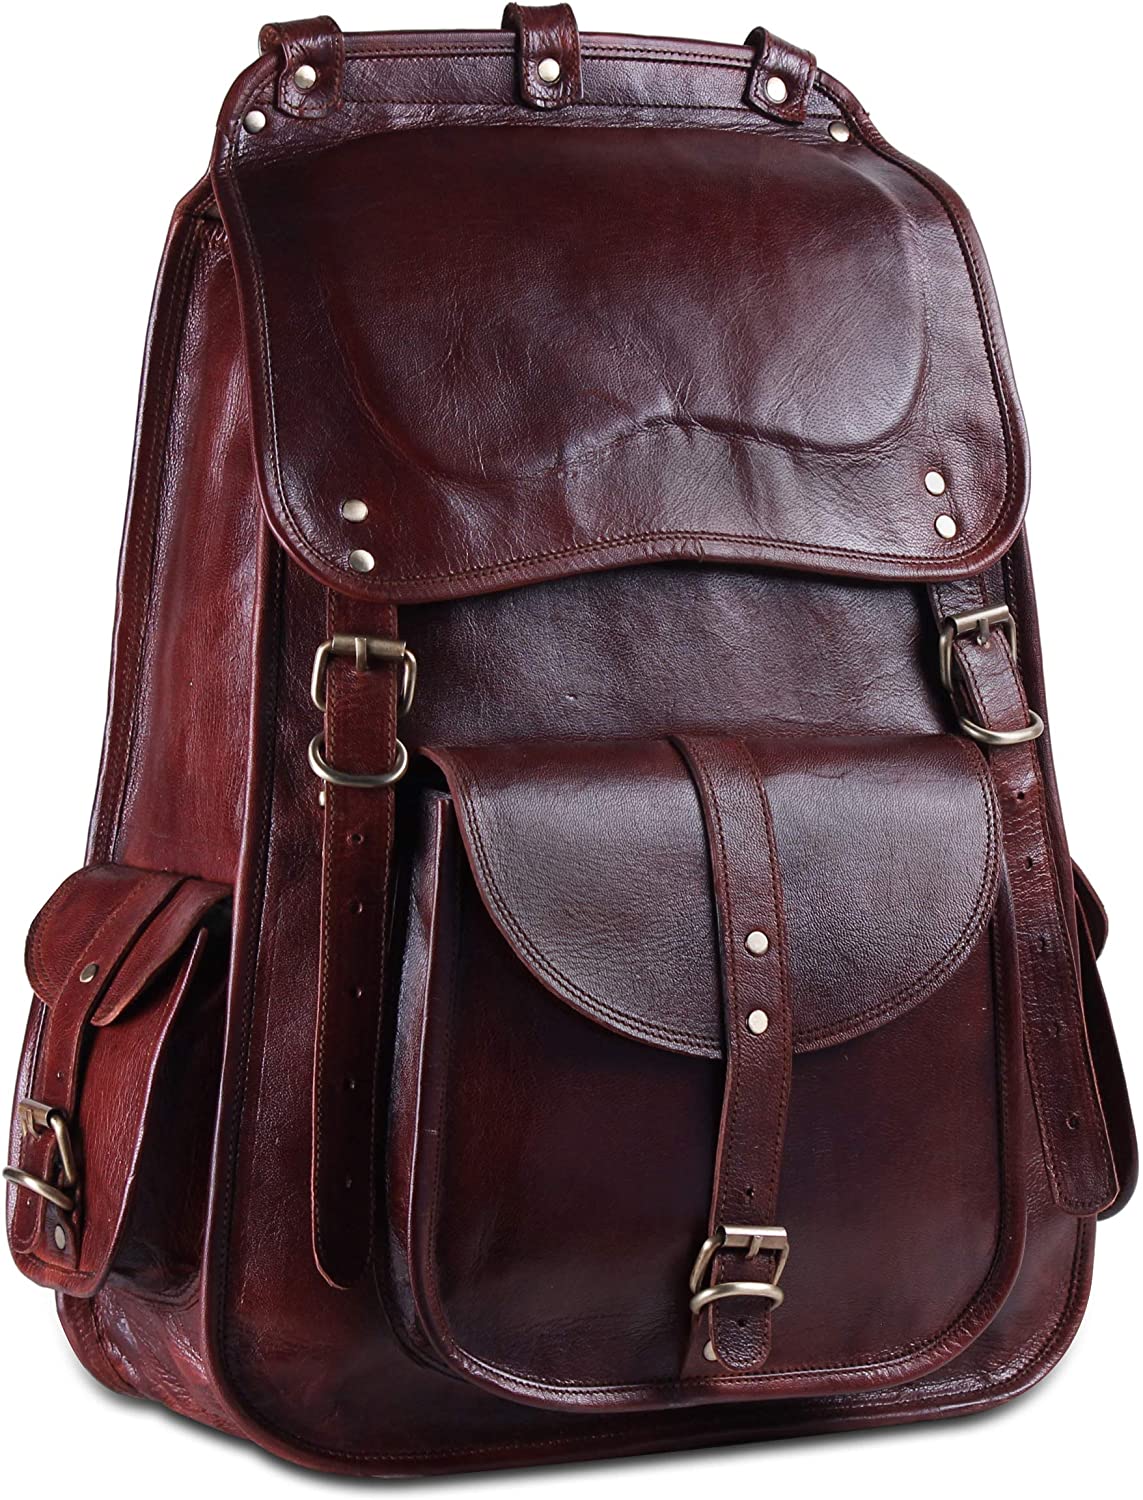  leather backpack for school